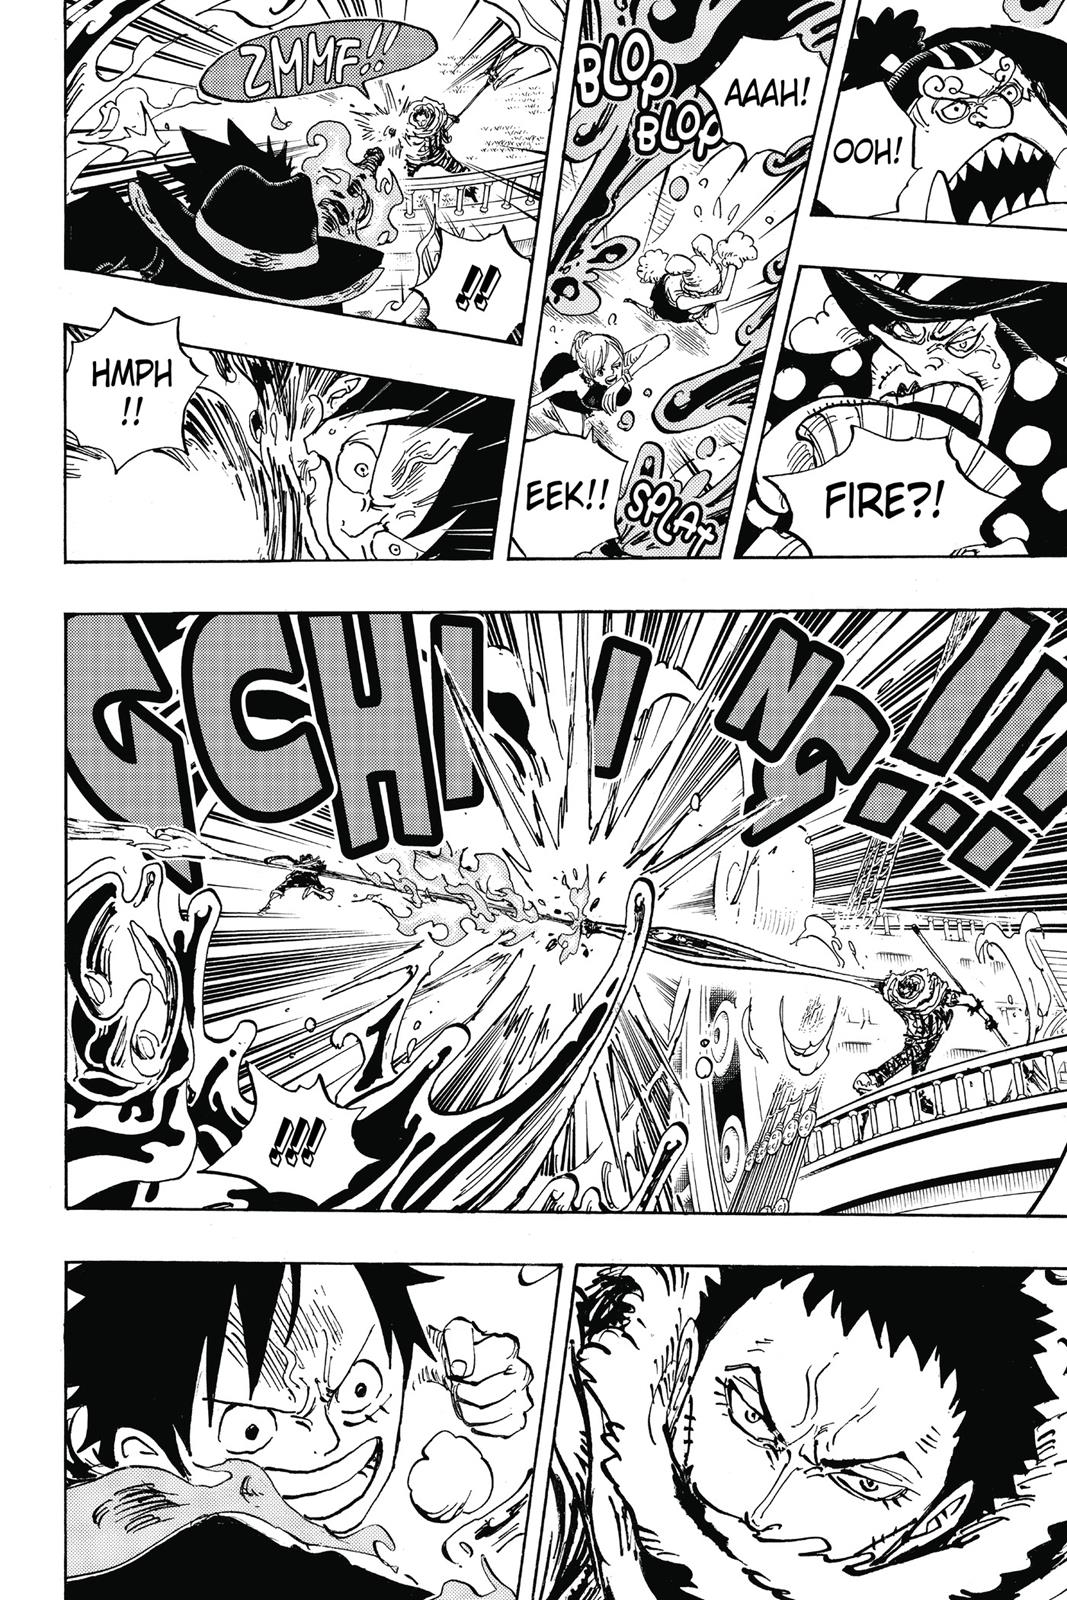 One Piece Chapter 877 One Piece Manga Online